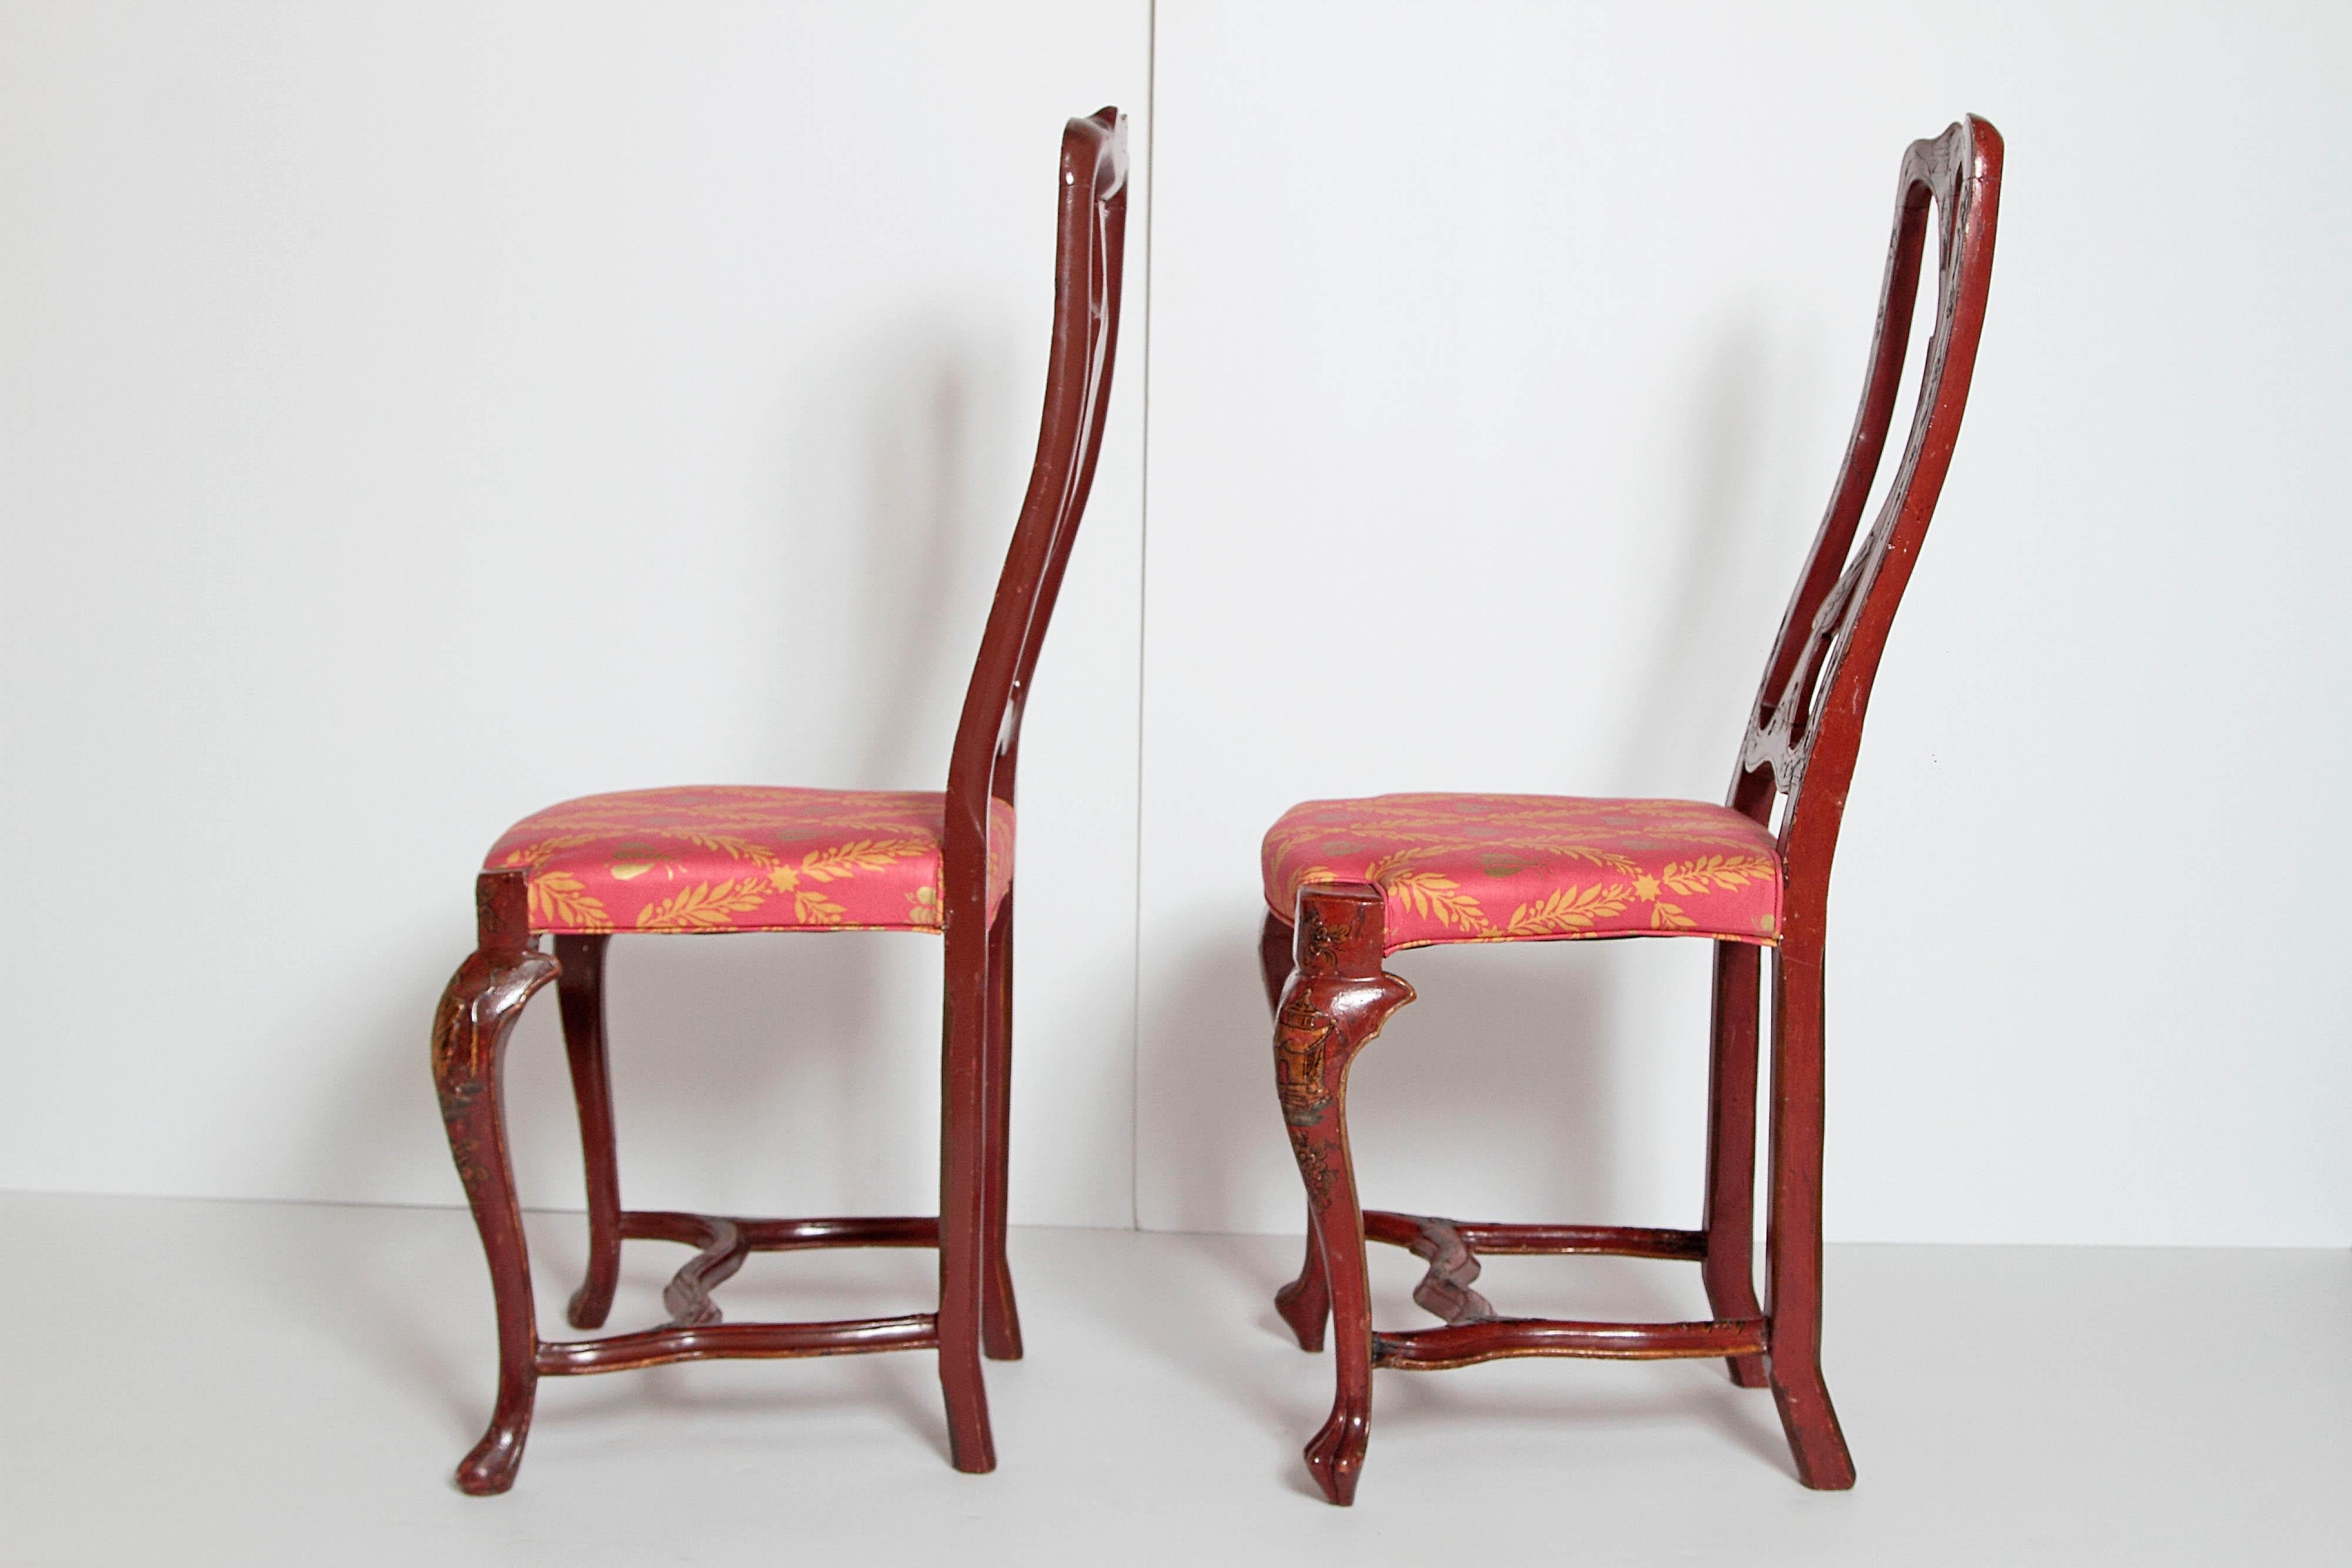 Carved Pair of English Side Chairs